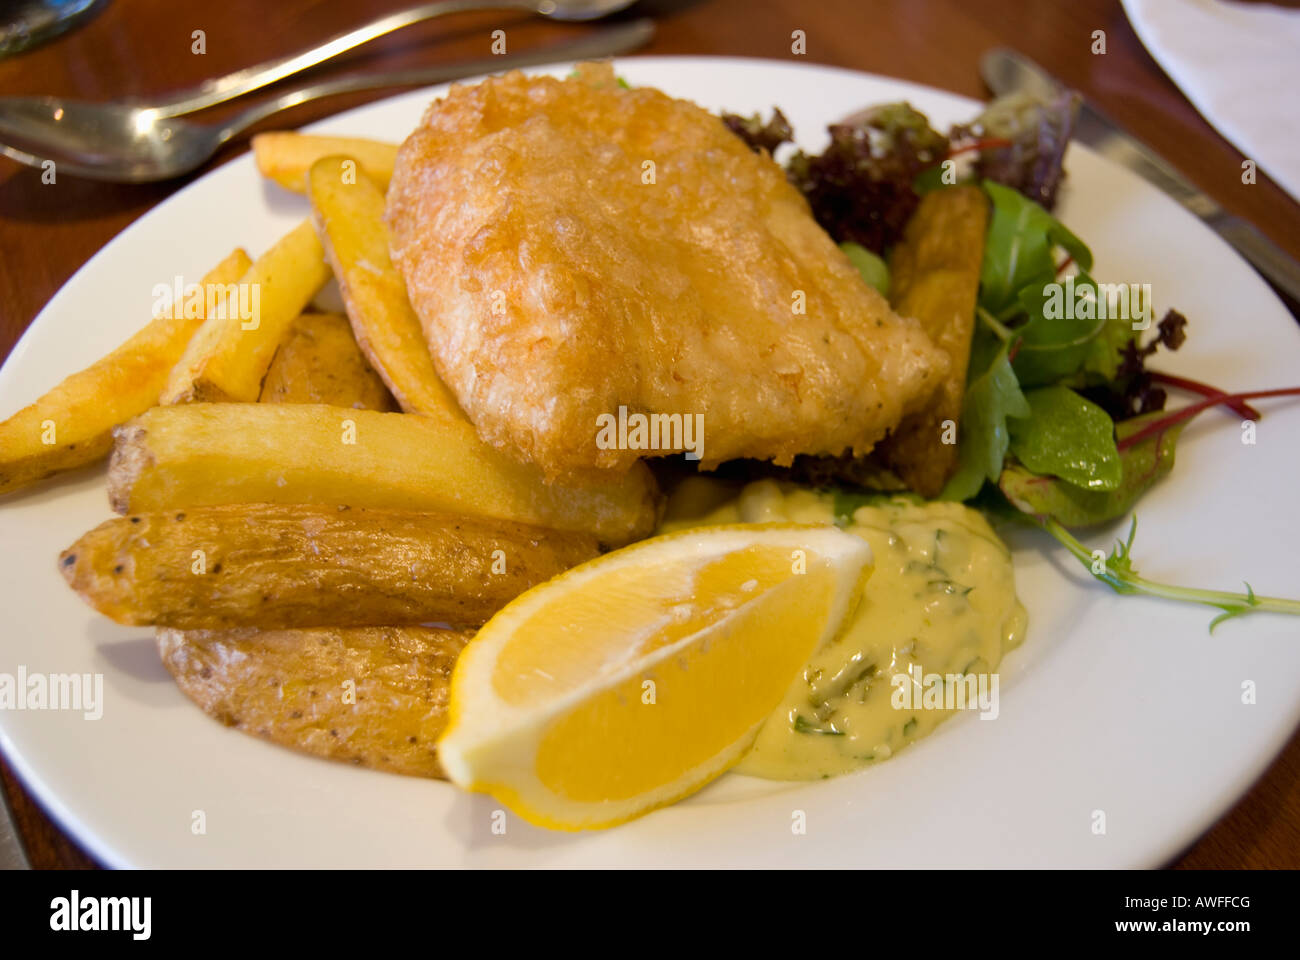 Fish and Chips, battered cod and deep fried potatos served in a restaurant in Edinburgh, Scotland. Stock Photo